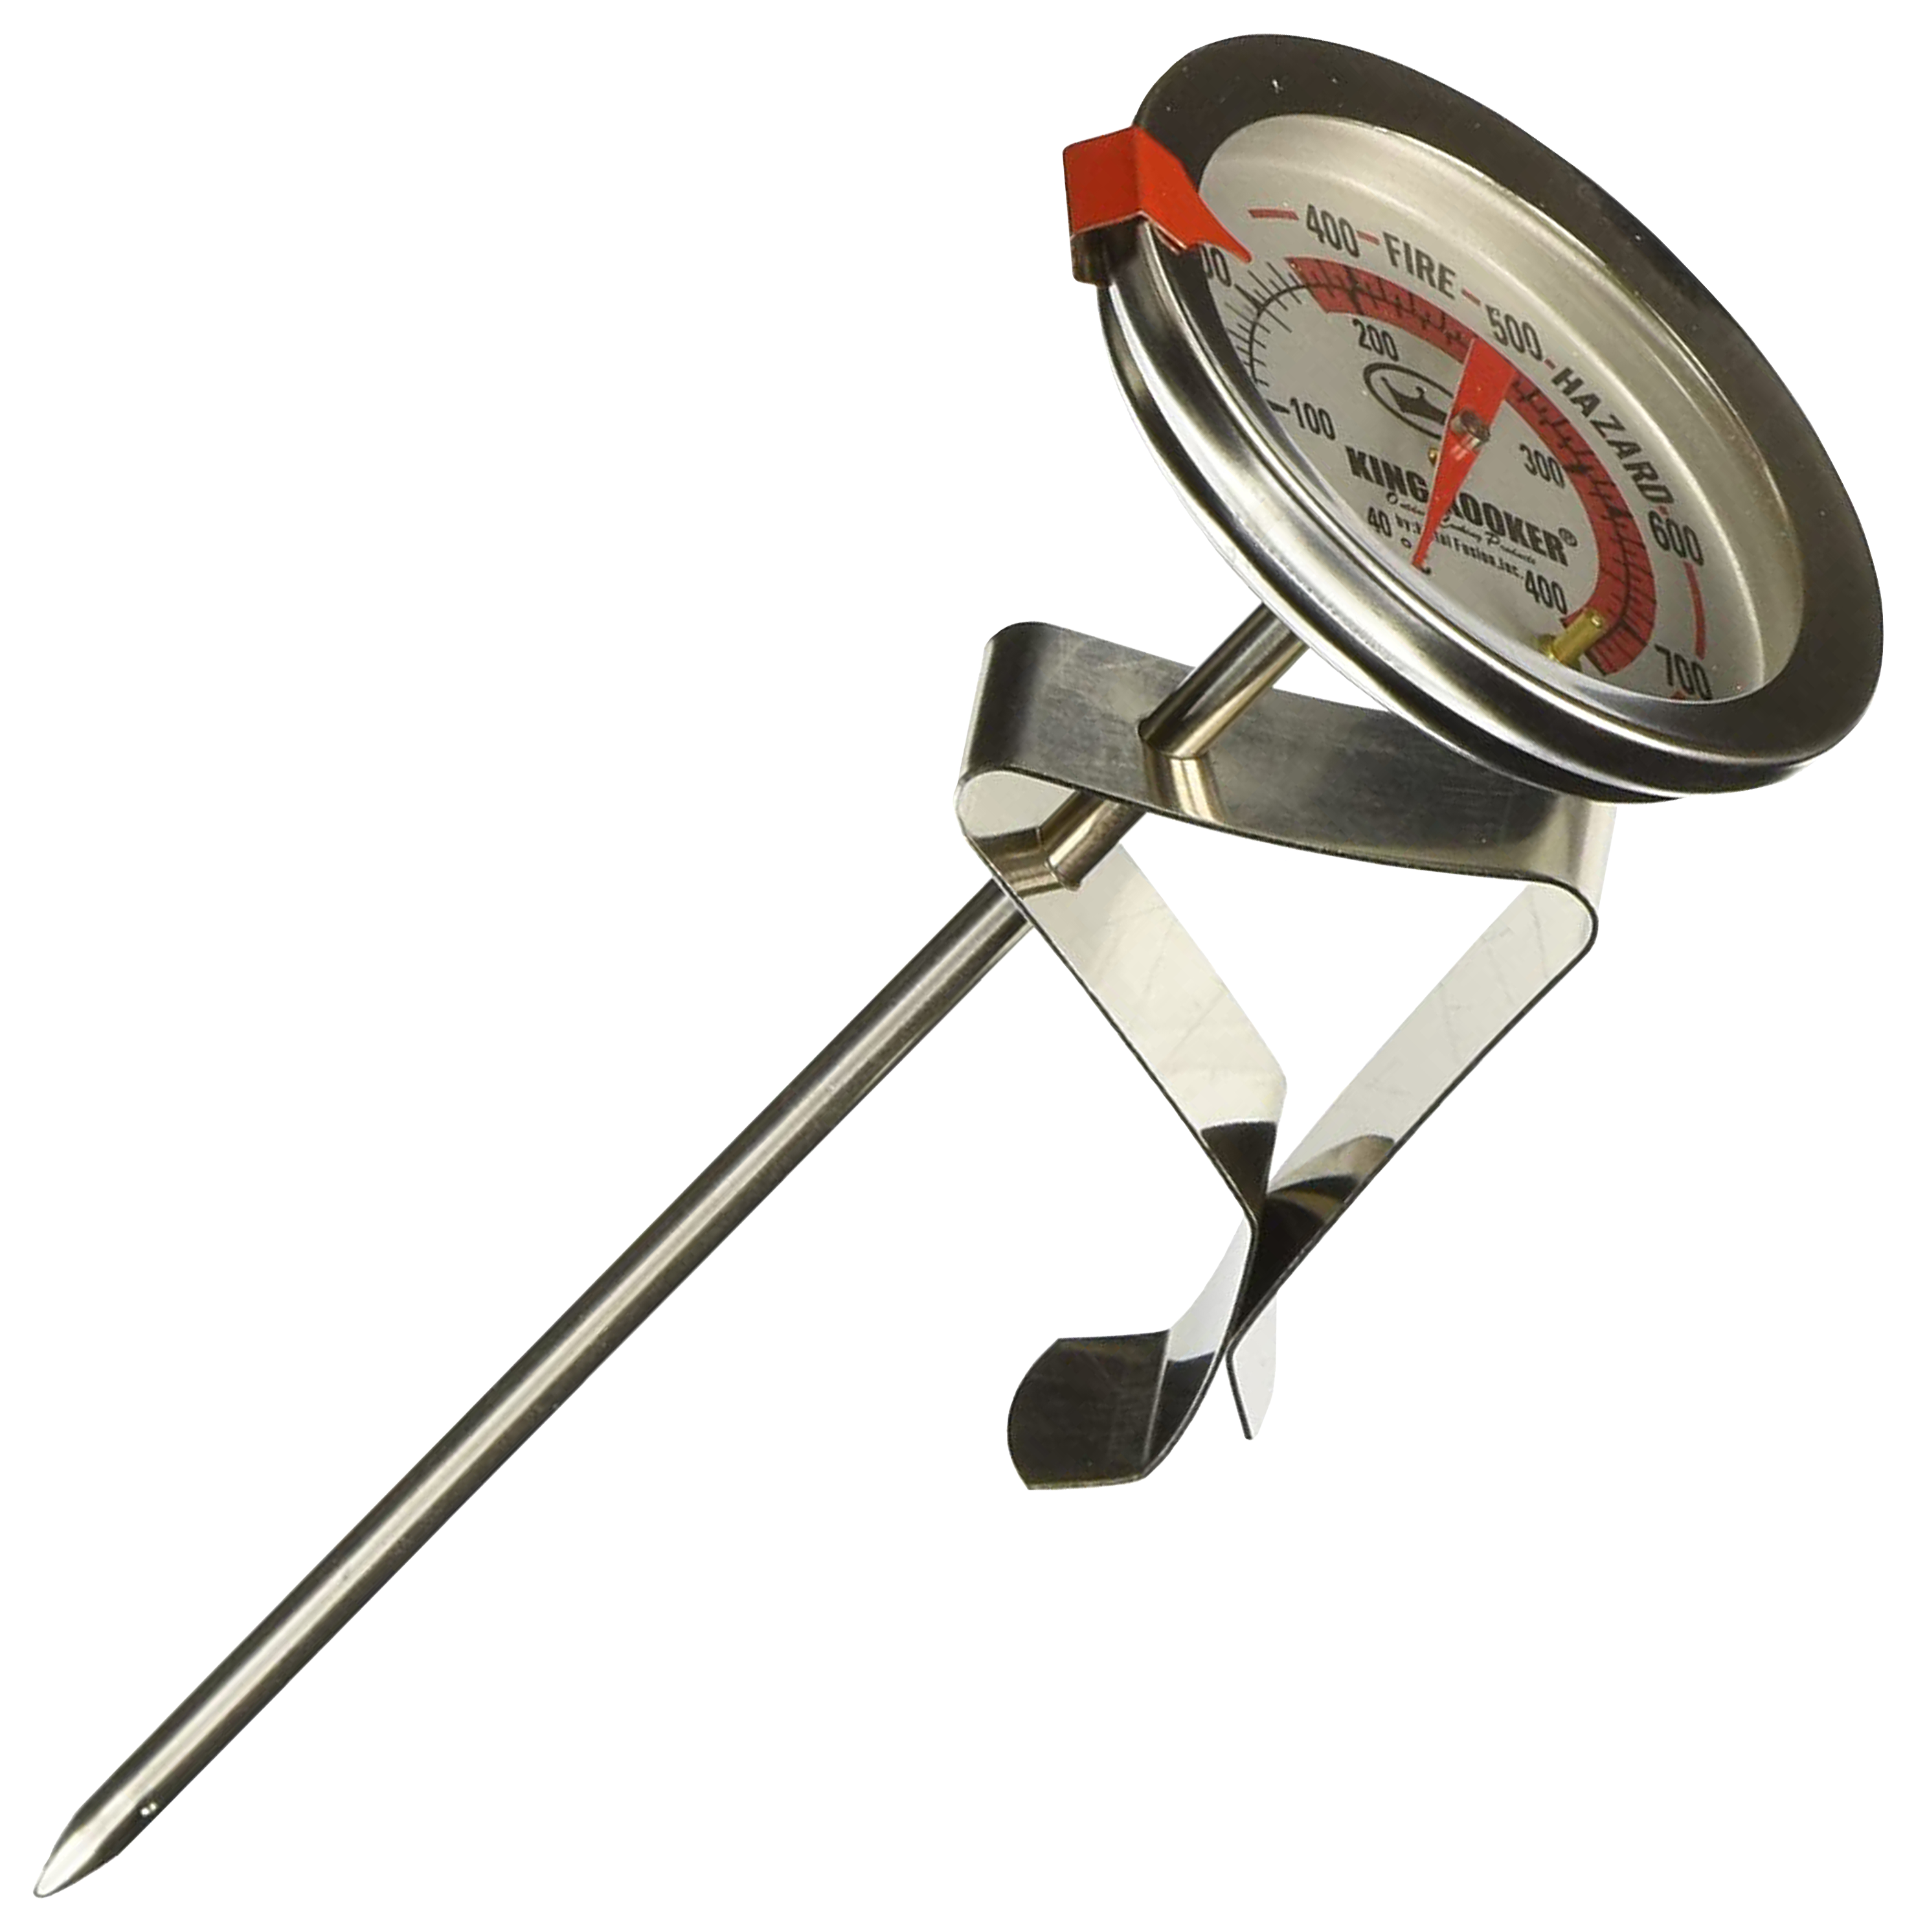 King Kooker Deep Fry Thermometer, 12 in.